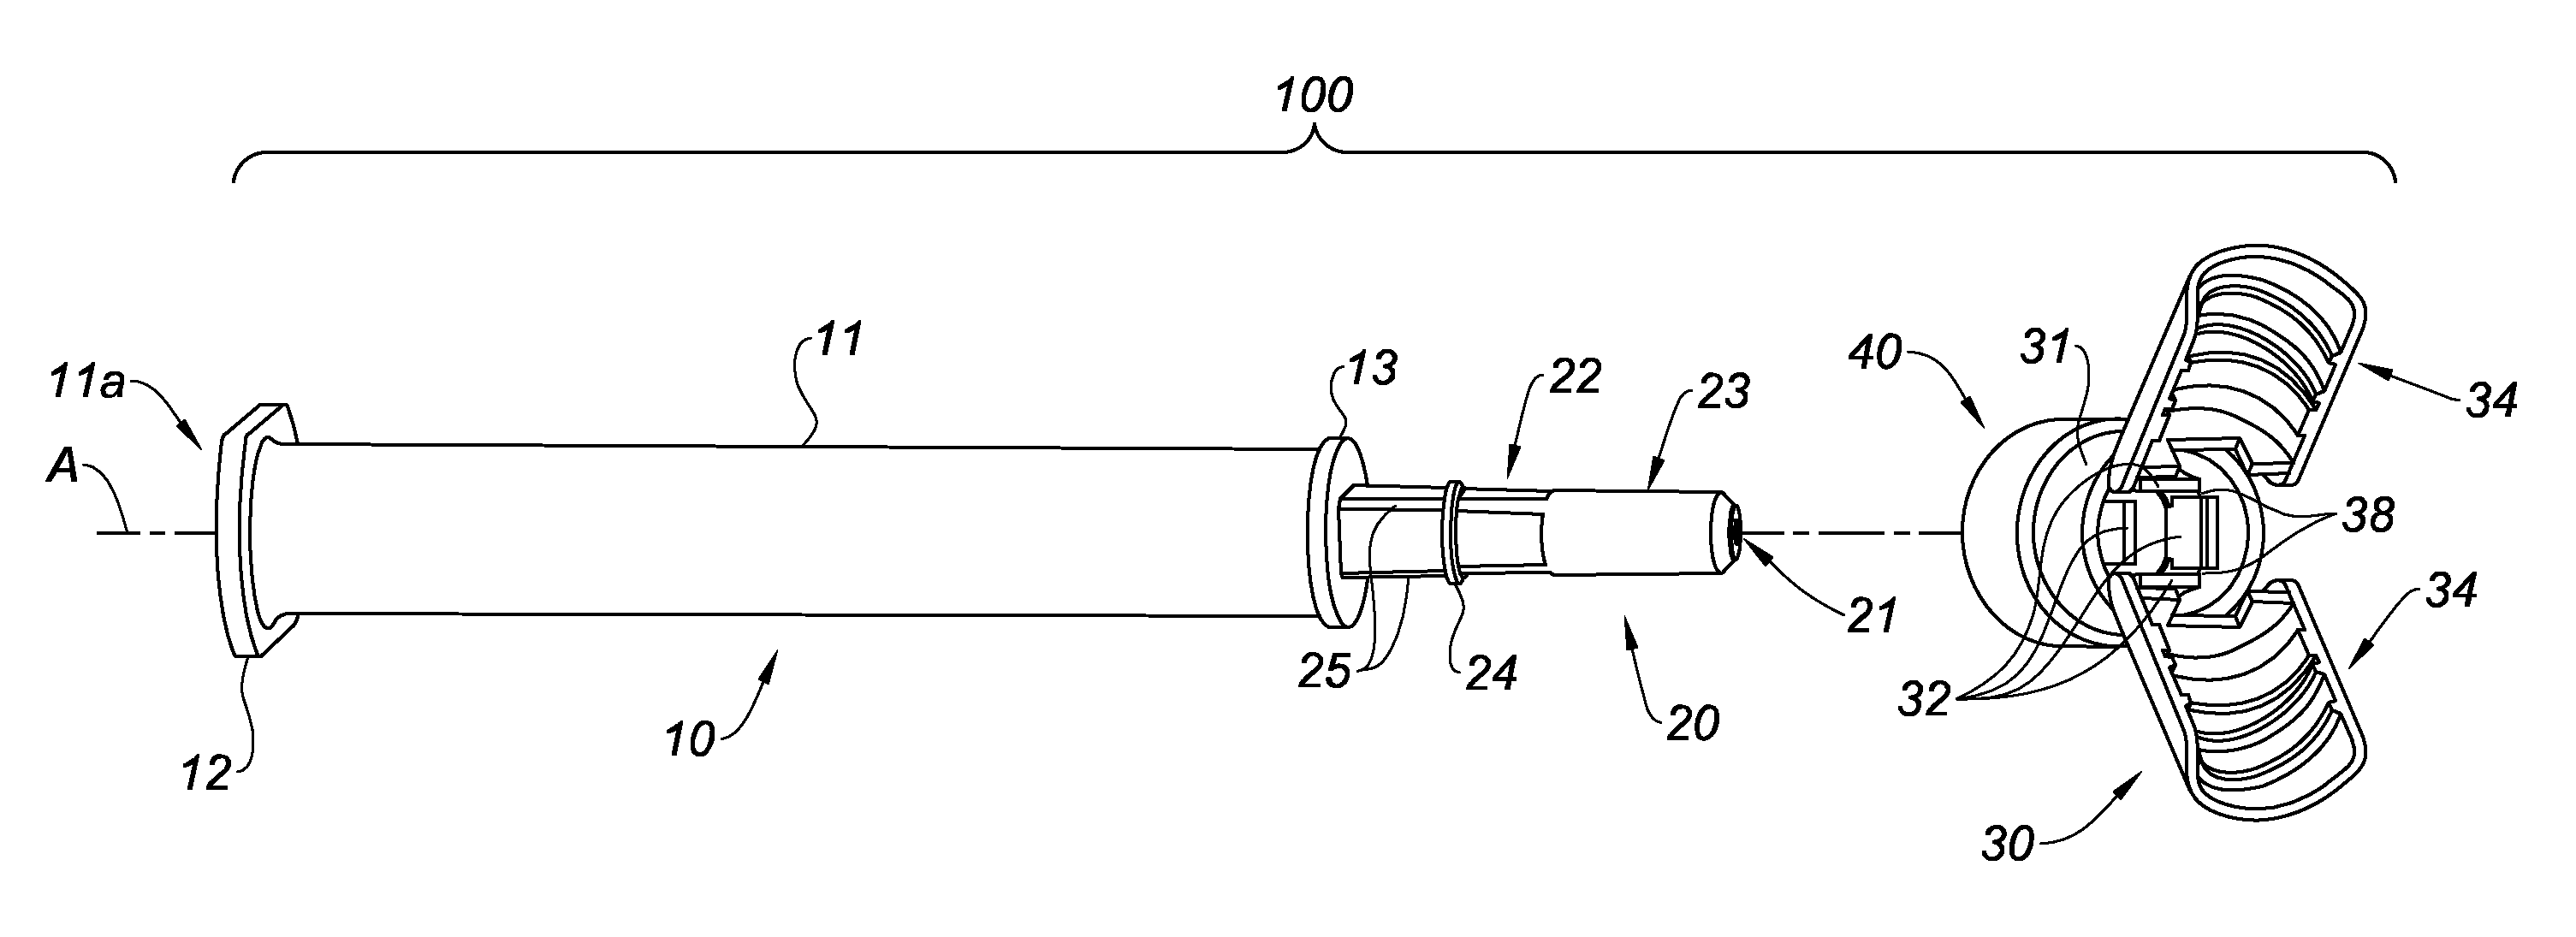 Drug delivery device and adaptor